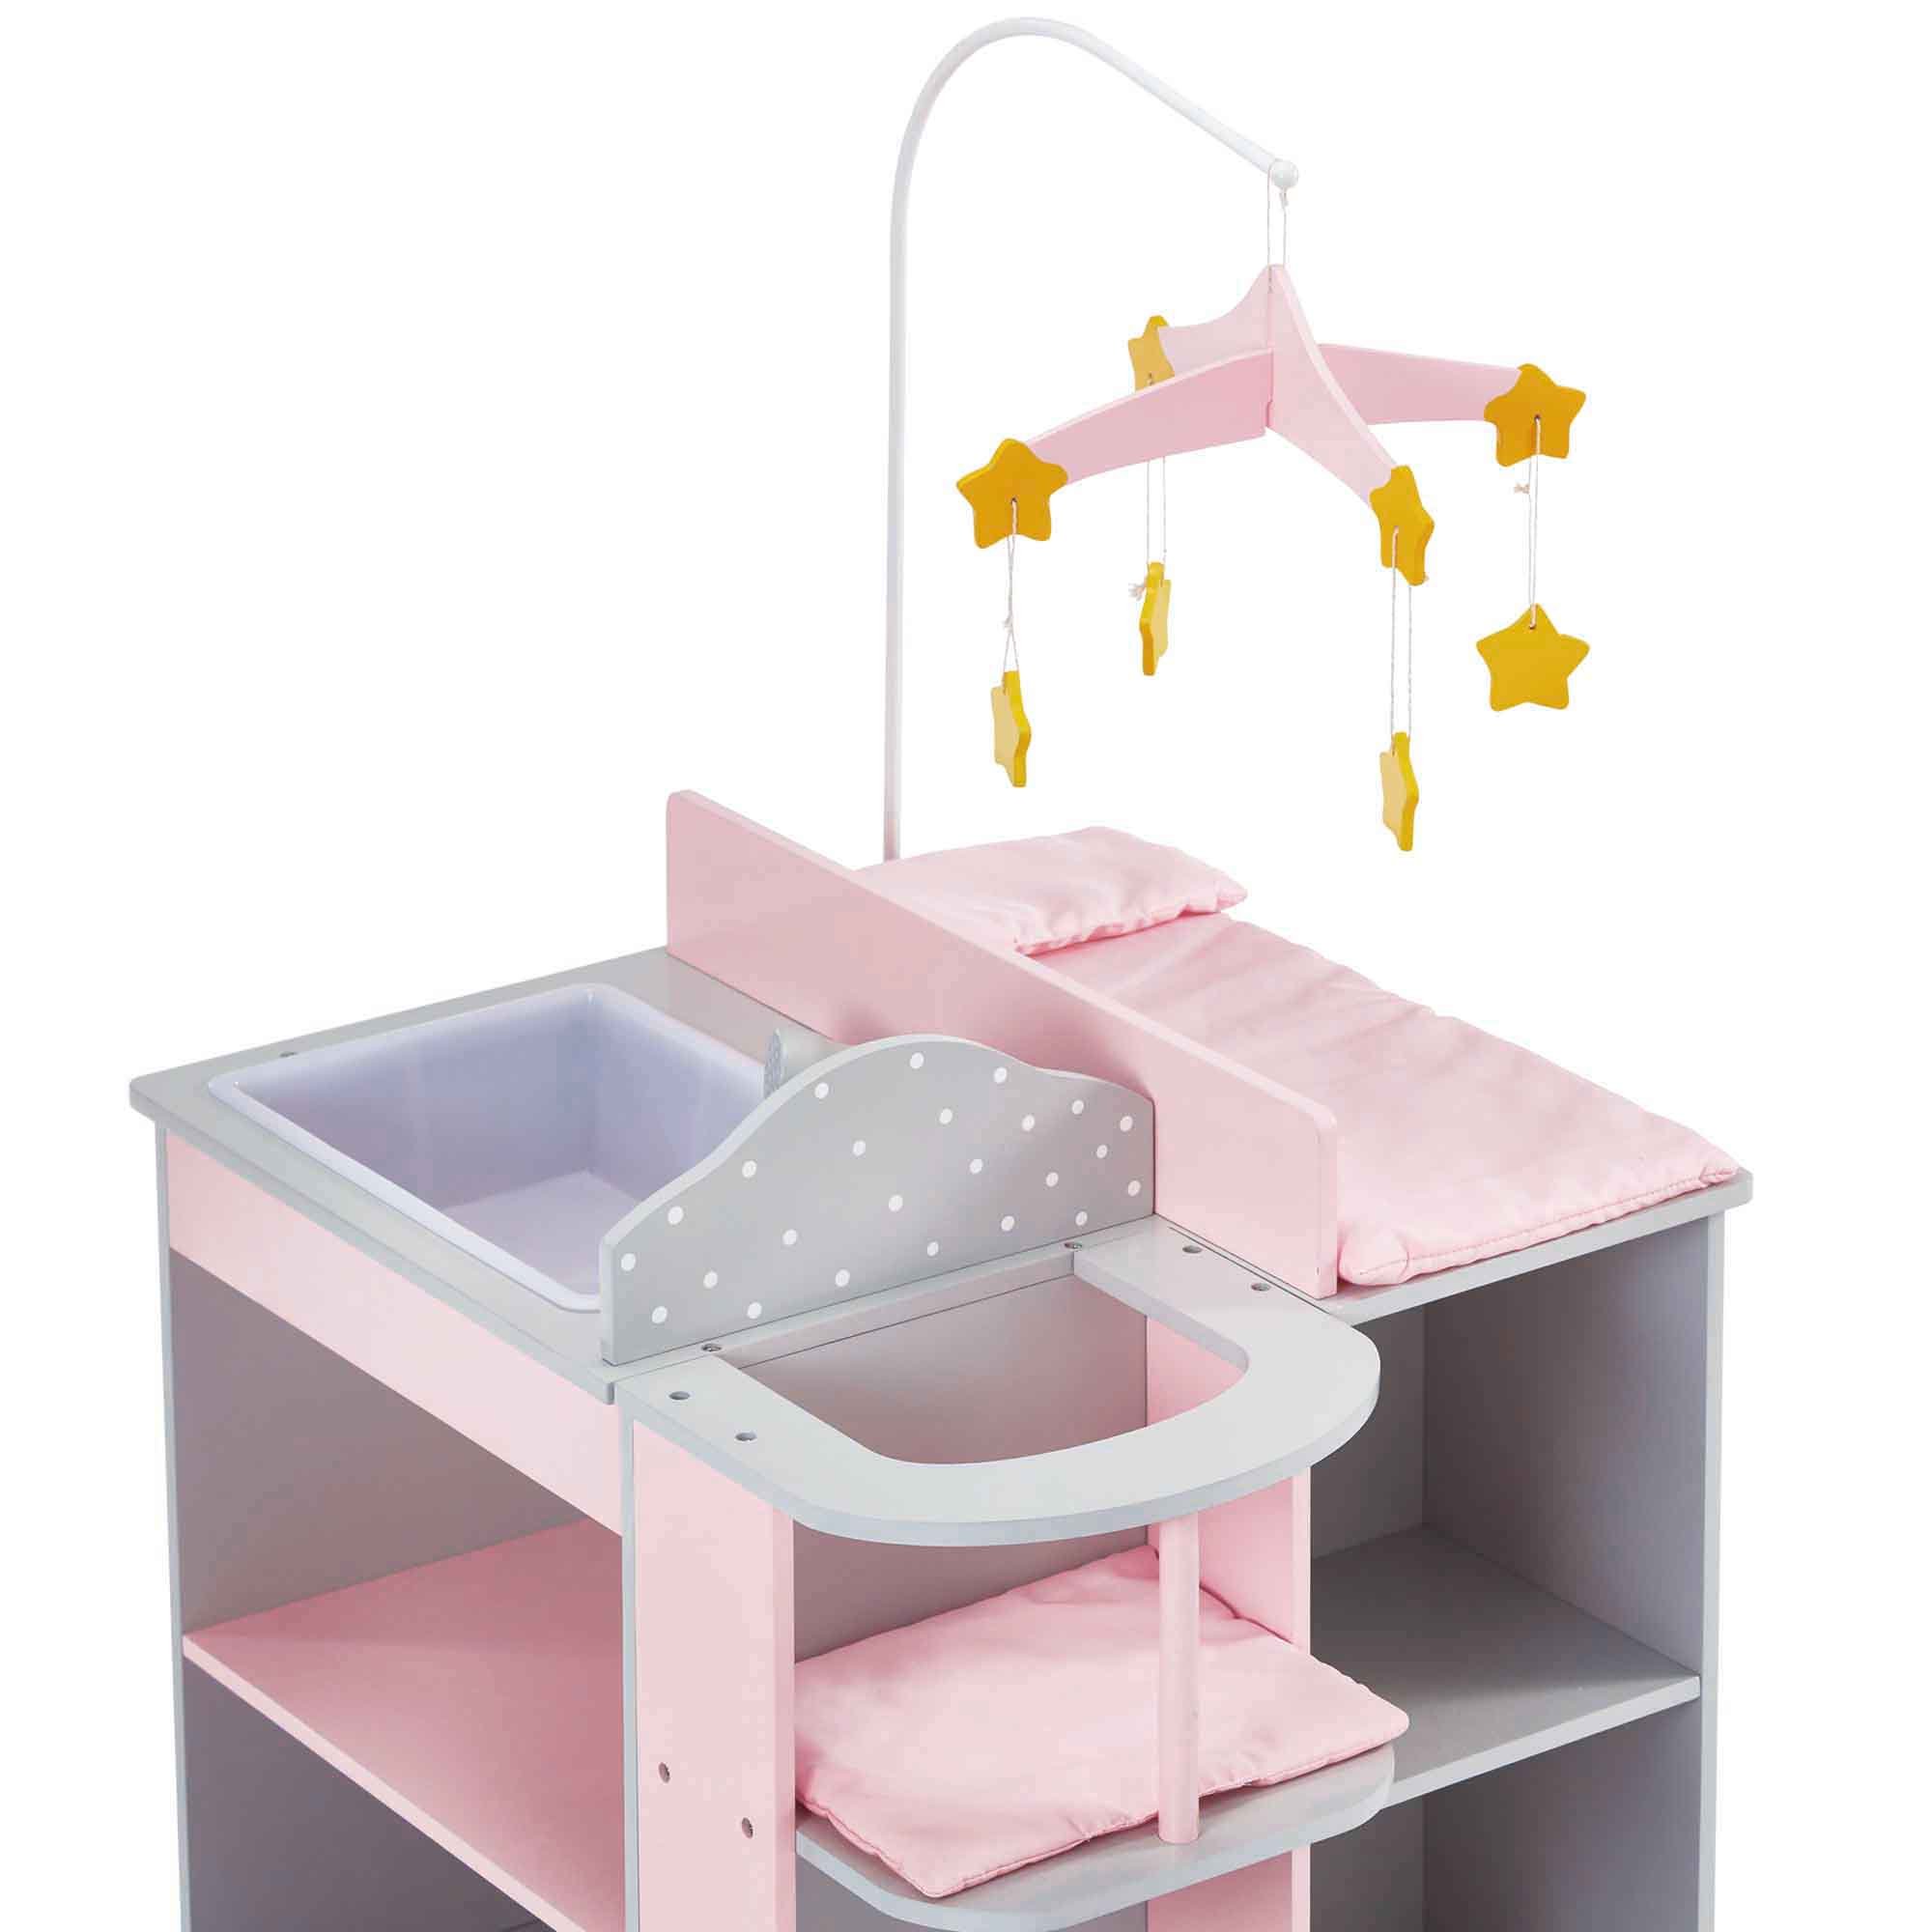 Olivia's Little World Baby Doll Changing Station, Baby Care Activity Center, Role Play Nursery Center with Storage for Dolls High Chair, Accessories for up to 18 Inch Dolls, Pink/Gray